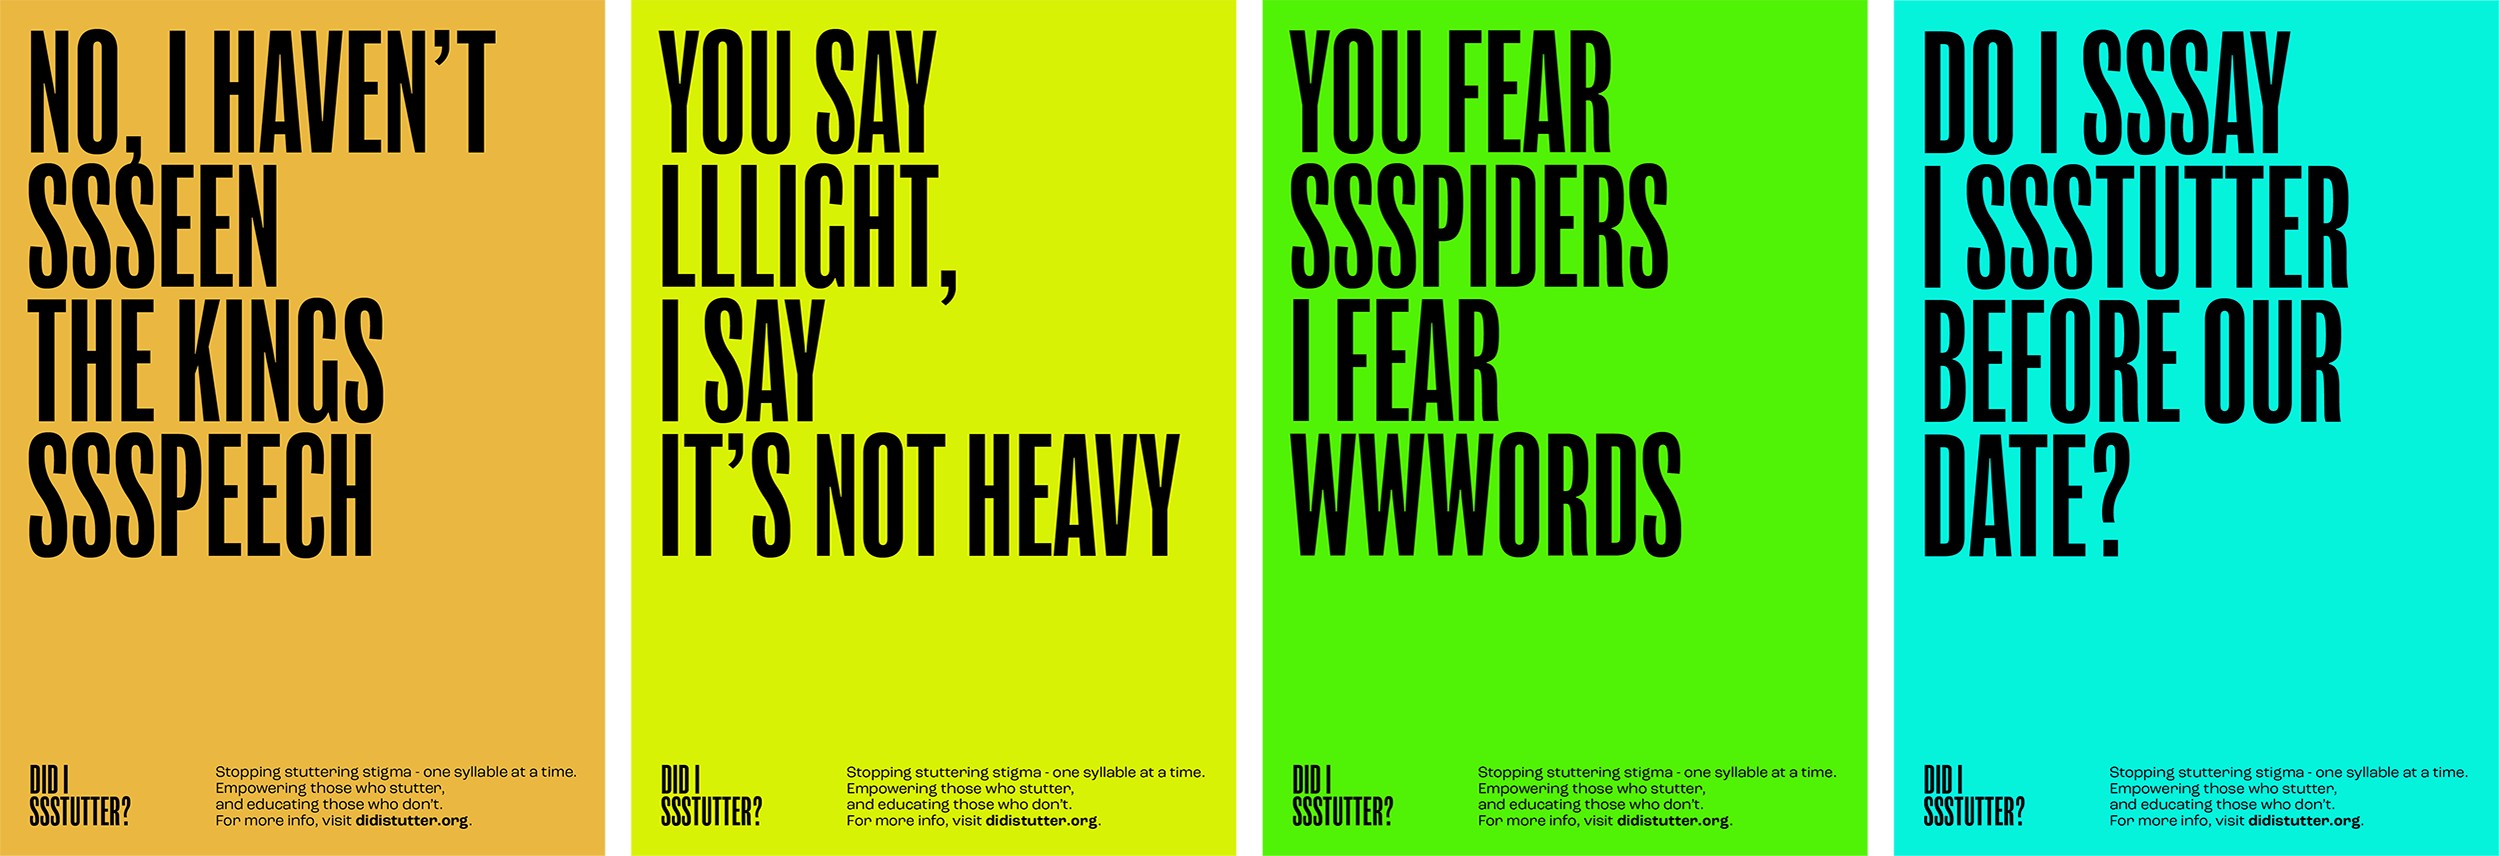 Variety of campaign posters, using the stuttered text to highlight some of difficulties and experiences that those with communication disorders often face in day-to-day life.